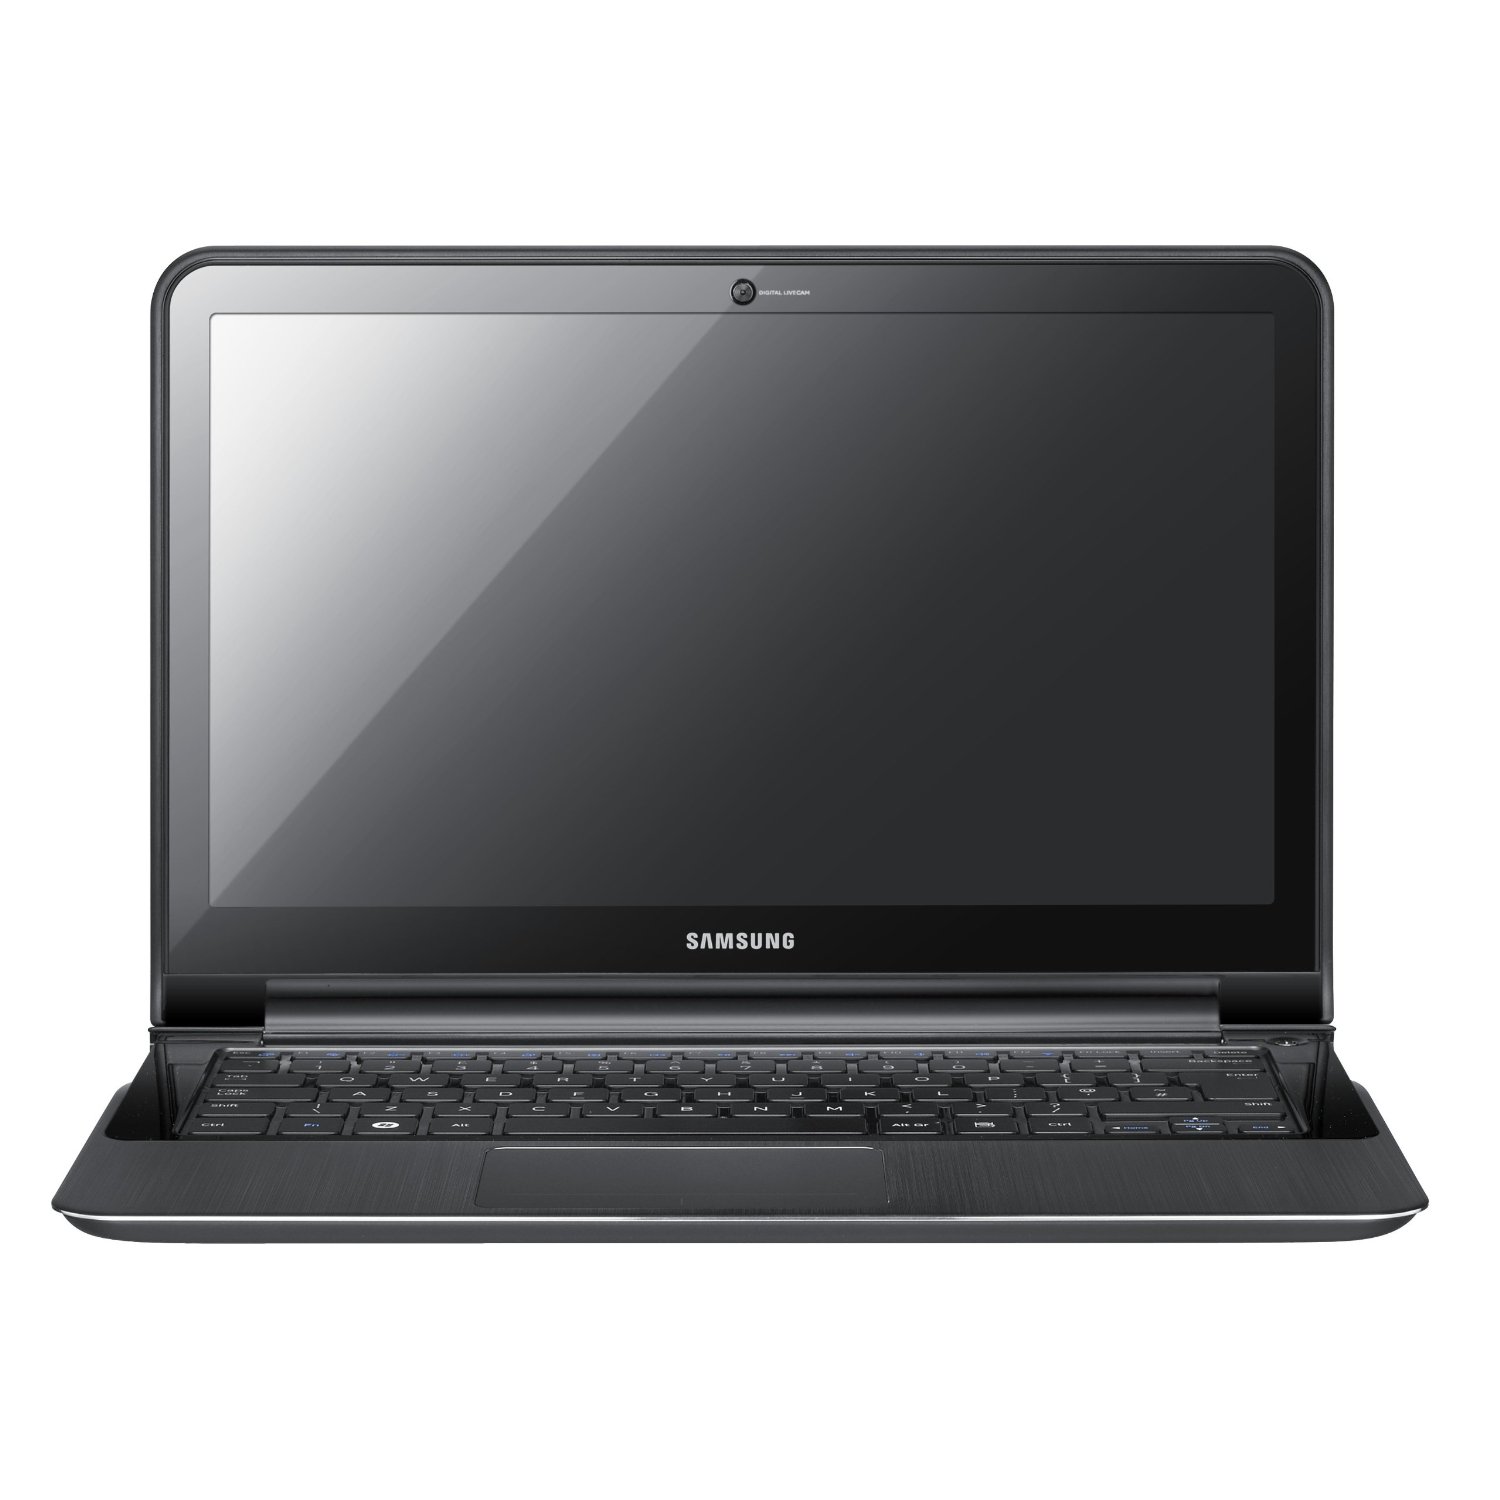 http://thetechjournal.com/wp-content/uploads/images/1109/1316665749-samsung-series-9-np900x3aa03us-133inch-laptop-1.jpg